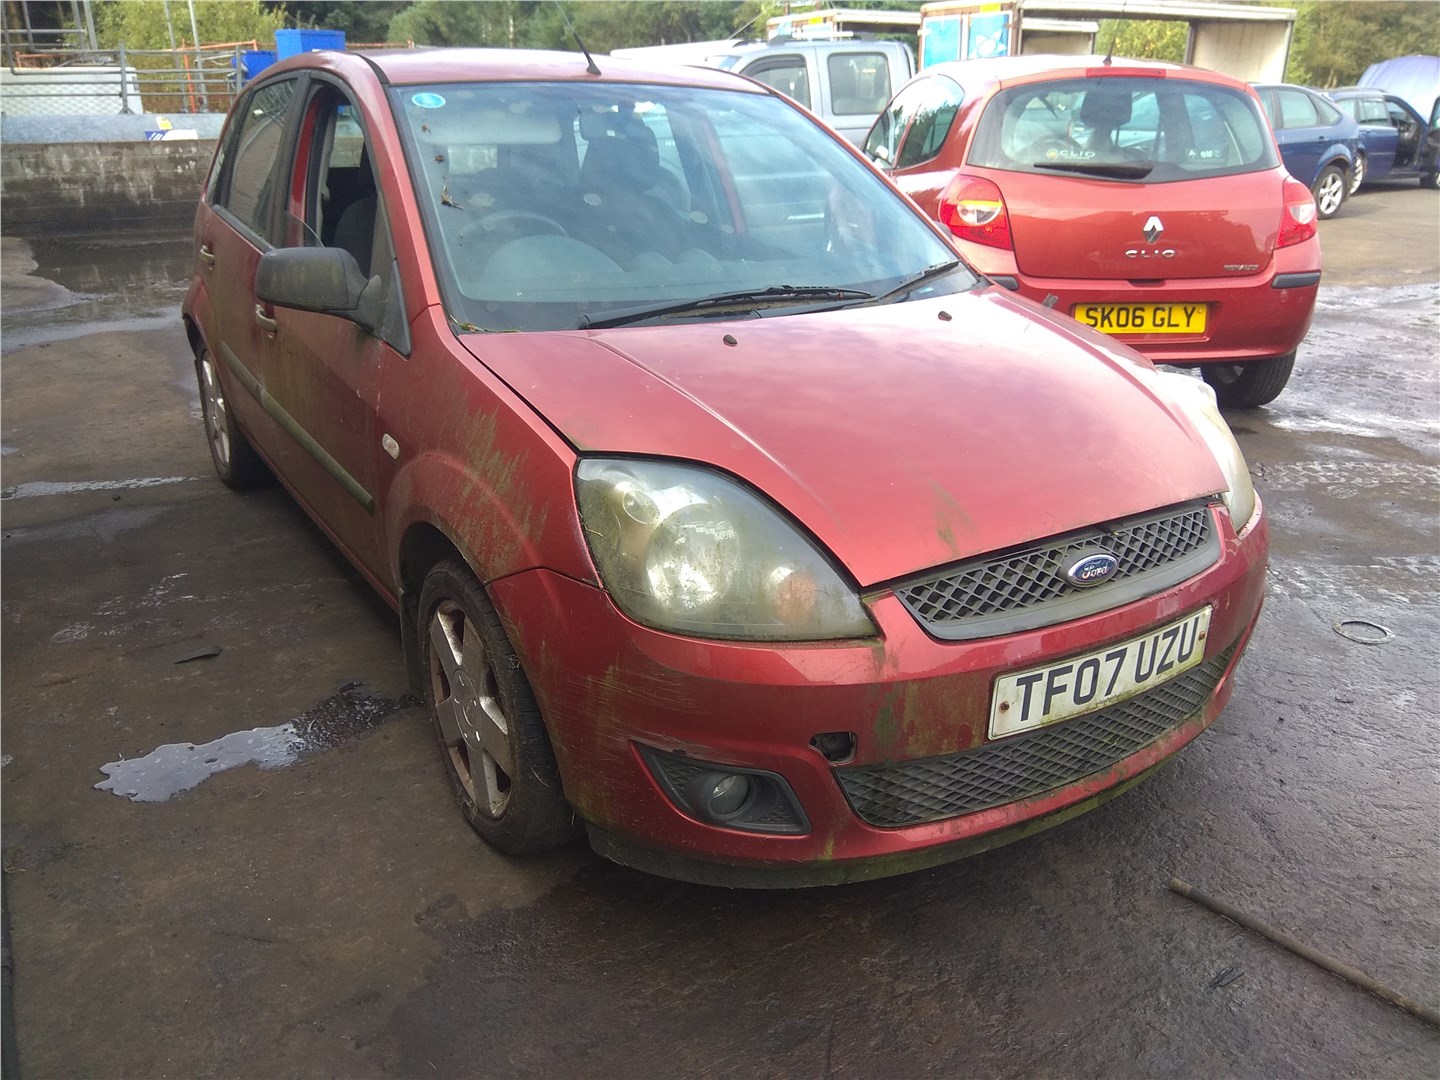 2S61A22601AGW Ручка двери салона Ford Fiesta 2001-2007 2007